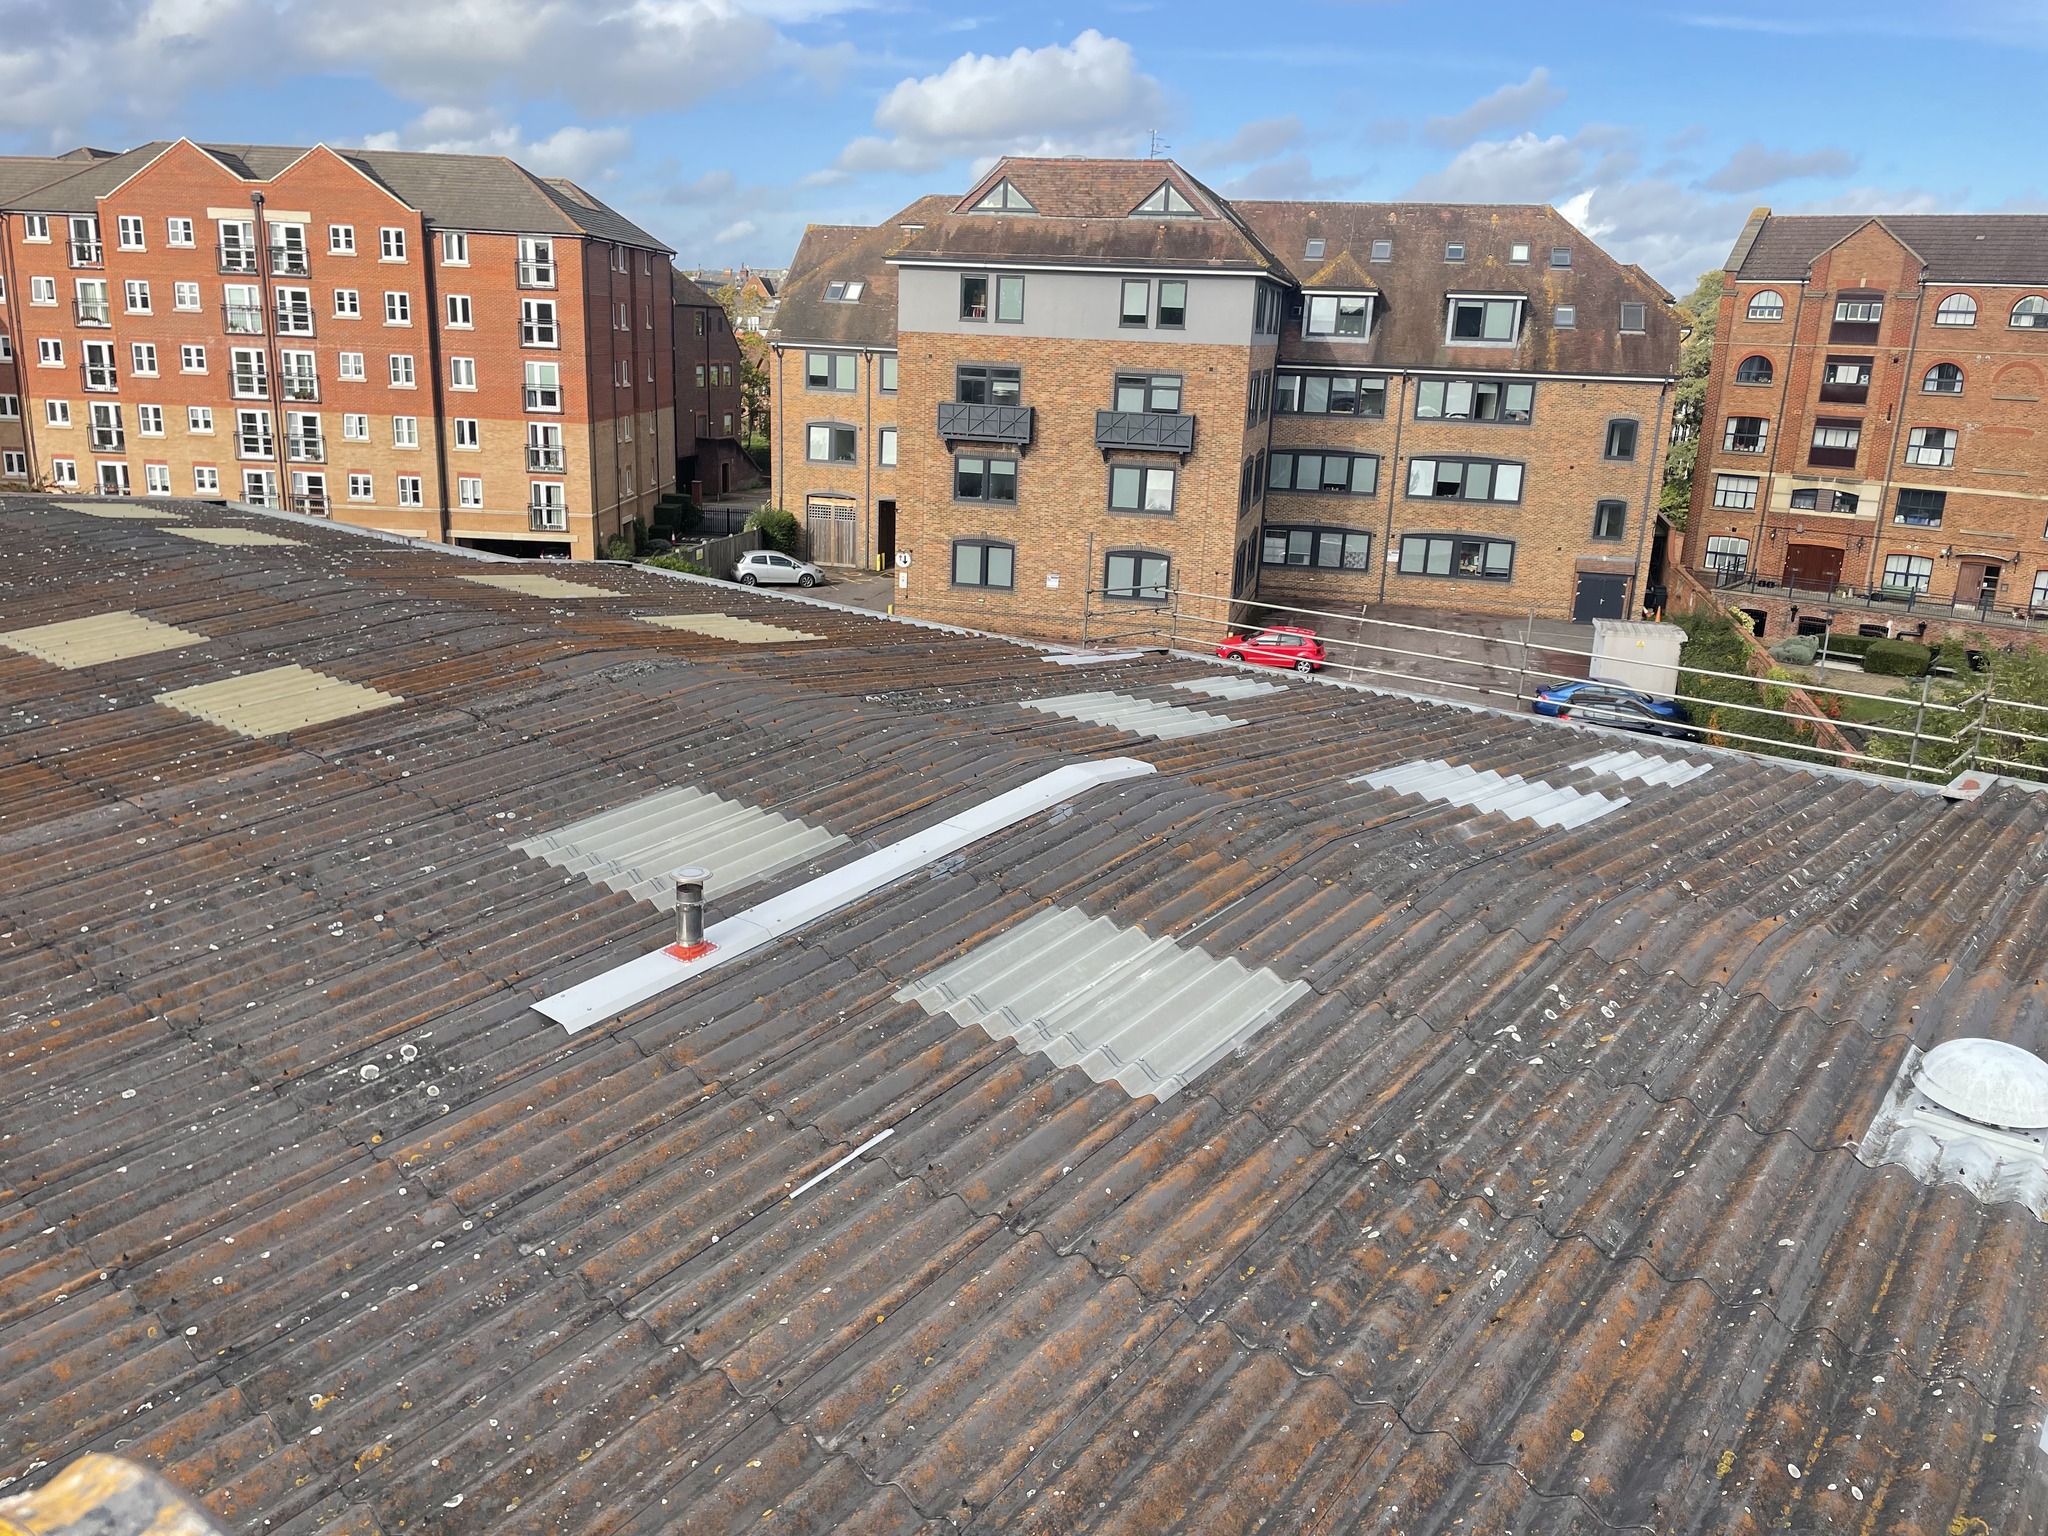 Roof repair works to a Factory and Office roof in Tonbridge, Kent